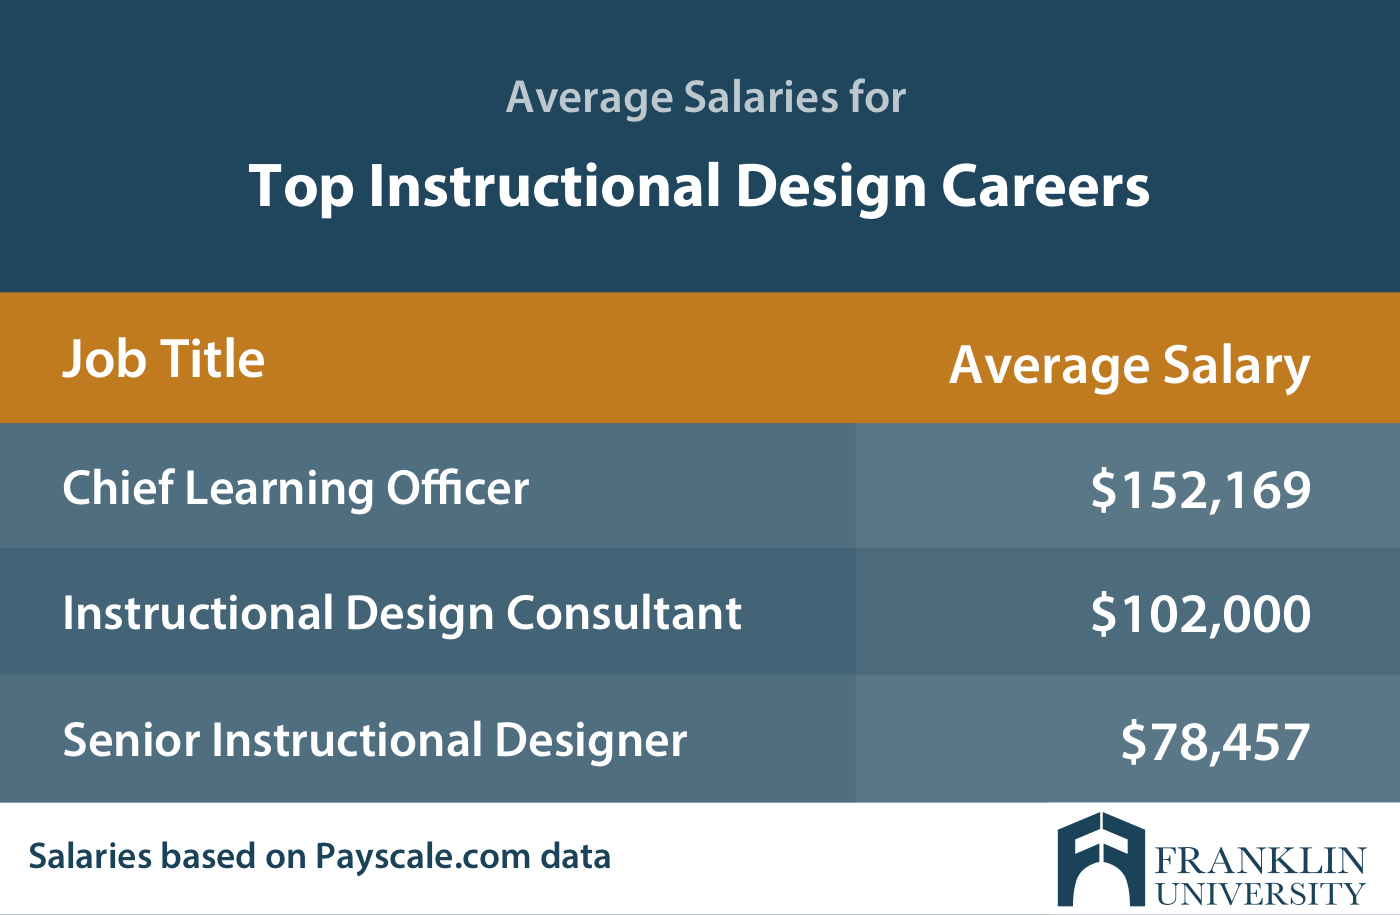 graphic describing the average salaries for top instructional design careers